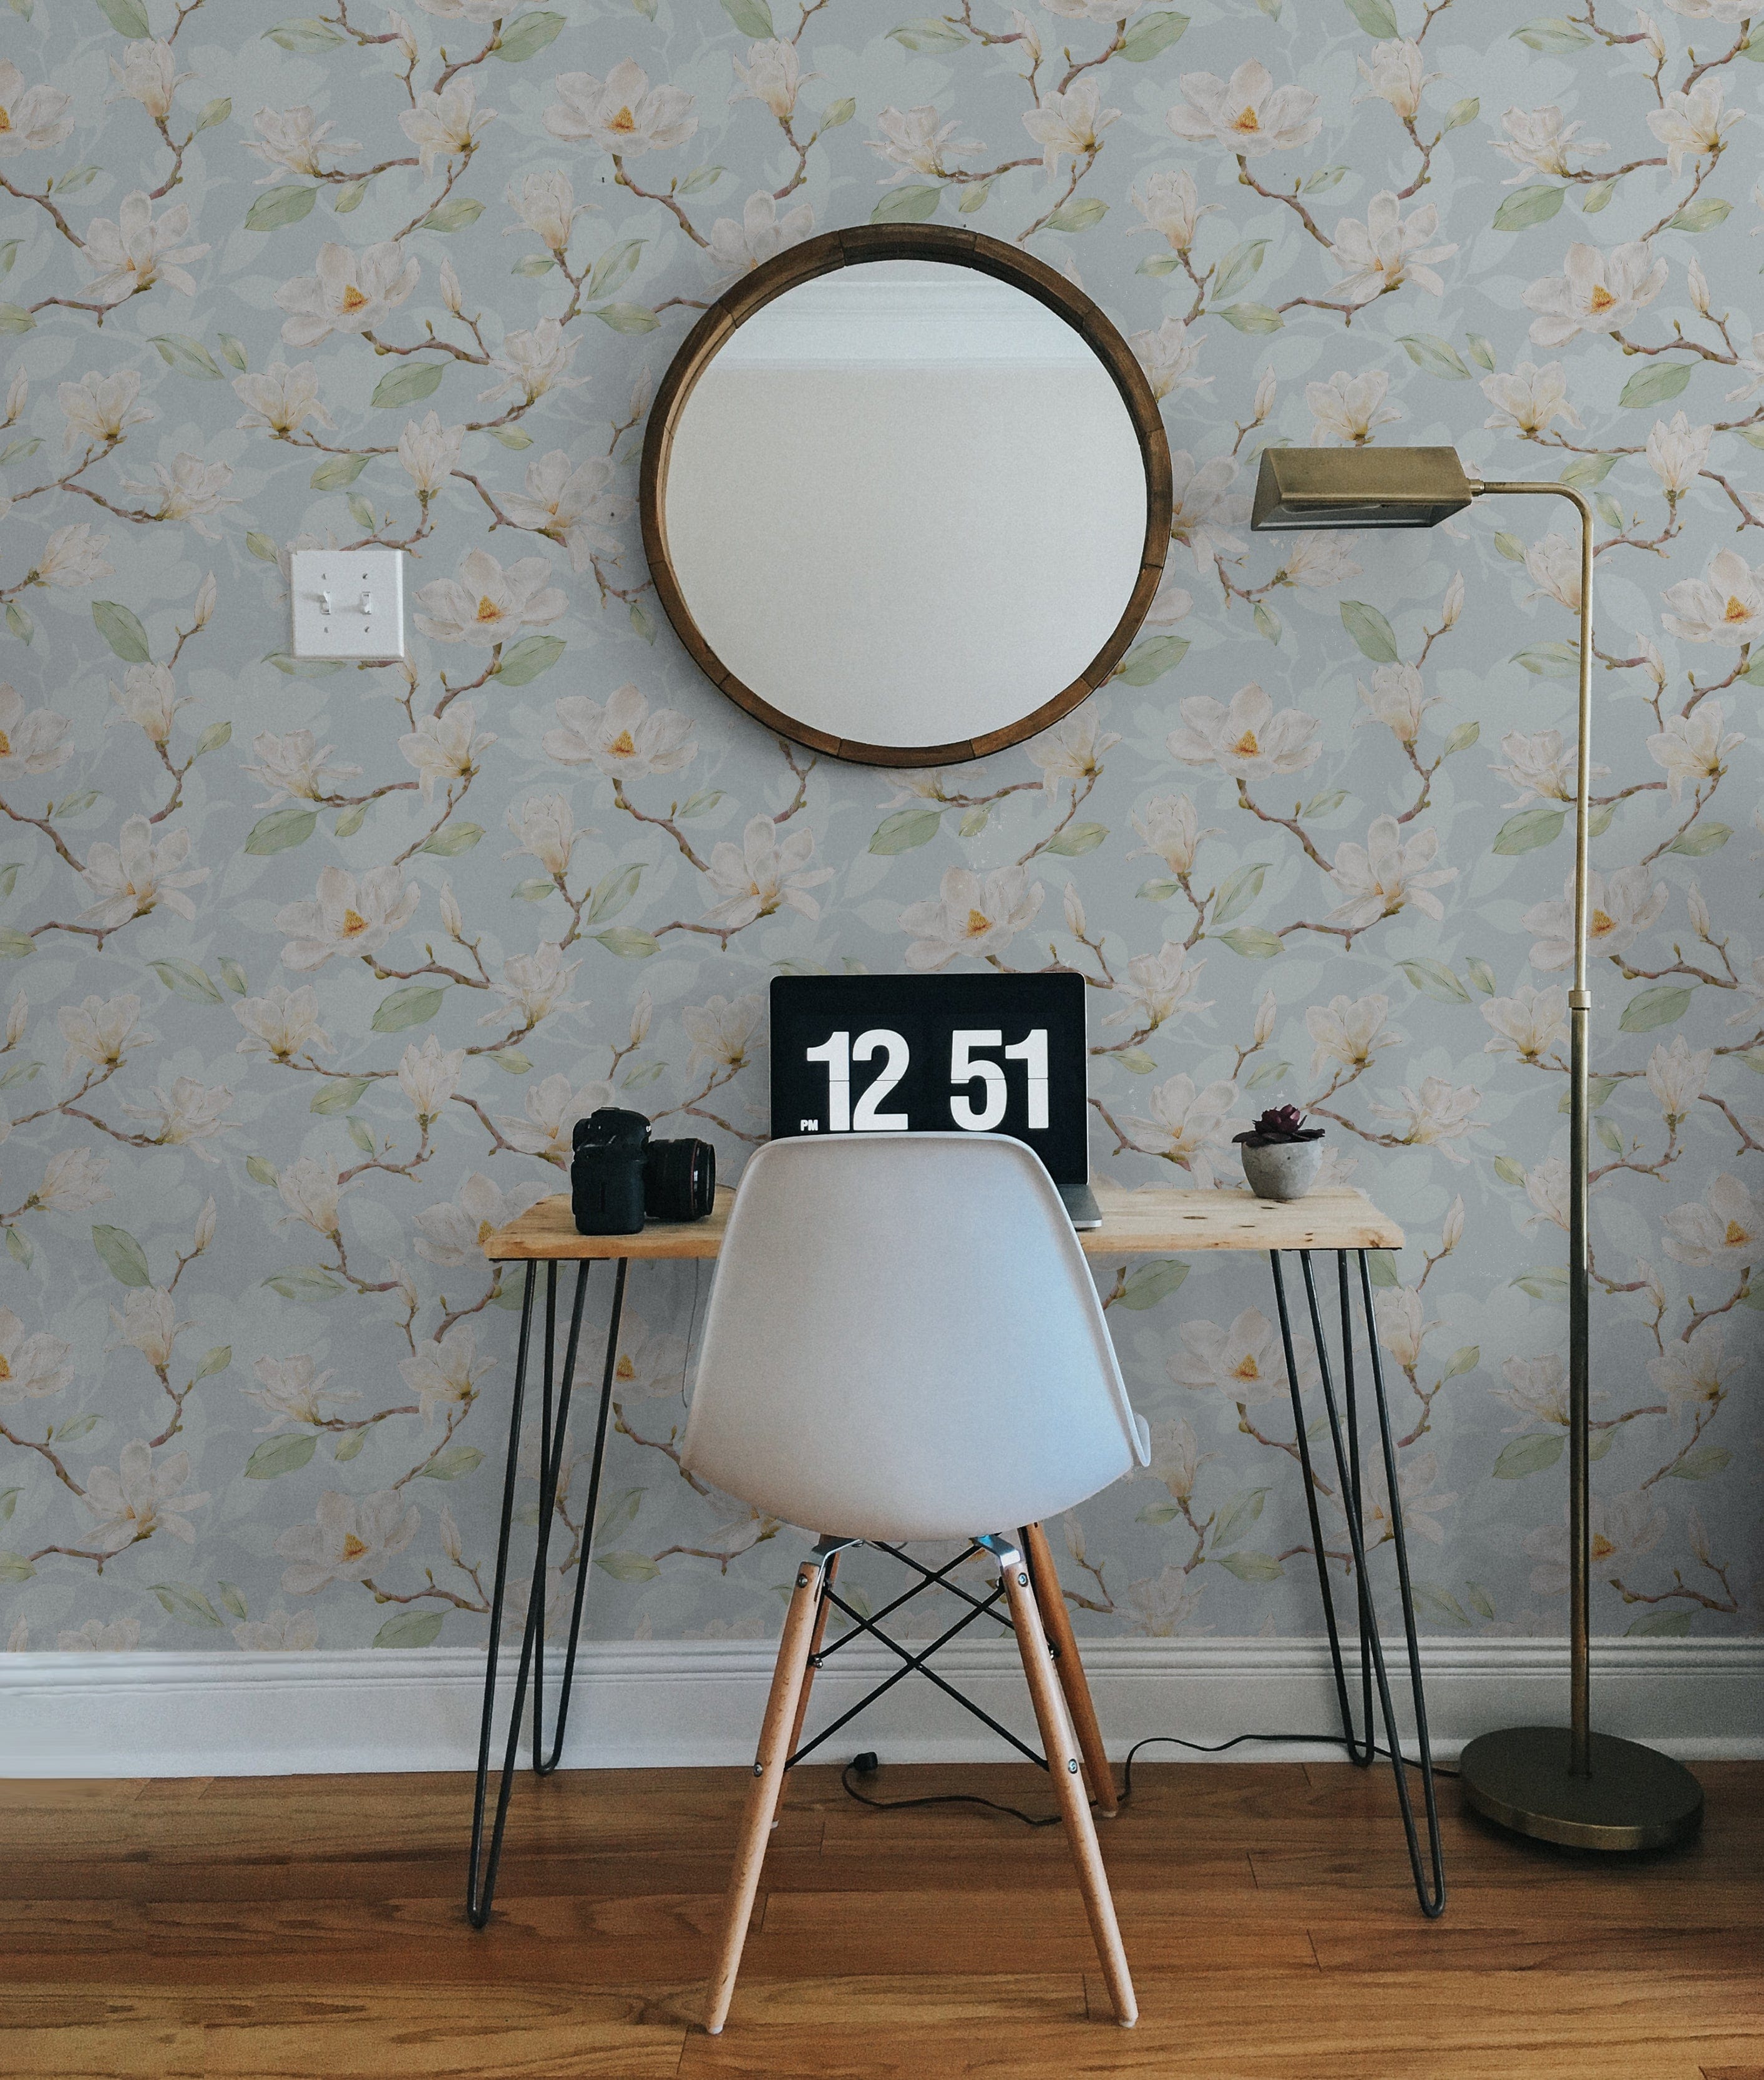 A stylish workspace featuring the 'Watercolour Magnolia Wallpaper II' on the wall, enhancing the area with its watercolor magnolias set against a pale blue background. A minimalist desk with a modern white chair and a sleek brass floor lamp complete the tranquil, inspired setting.